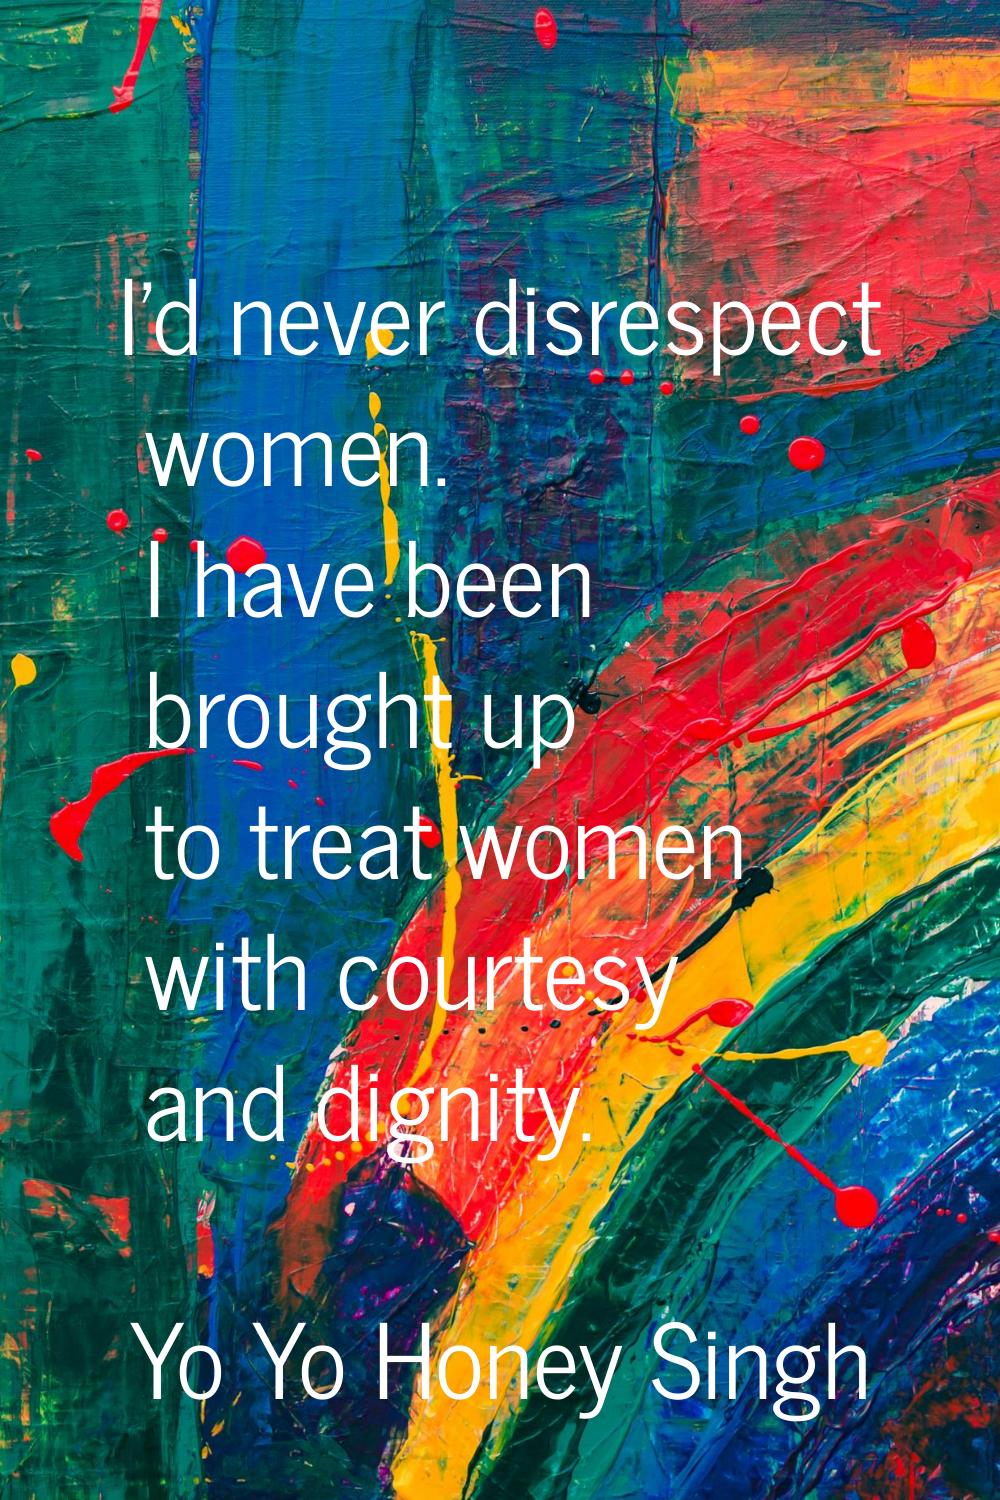 I'd never disrespect women. I have been brought up to treat women with courtesy and dignity.